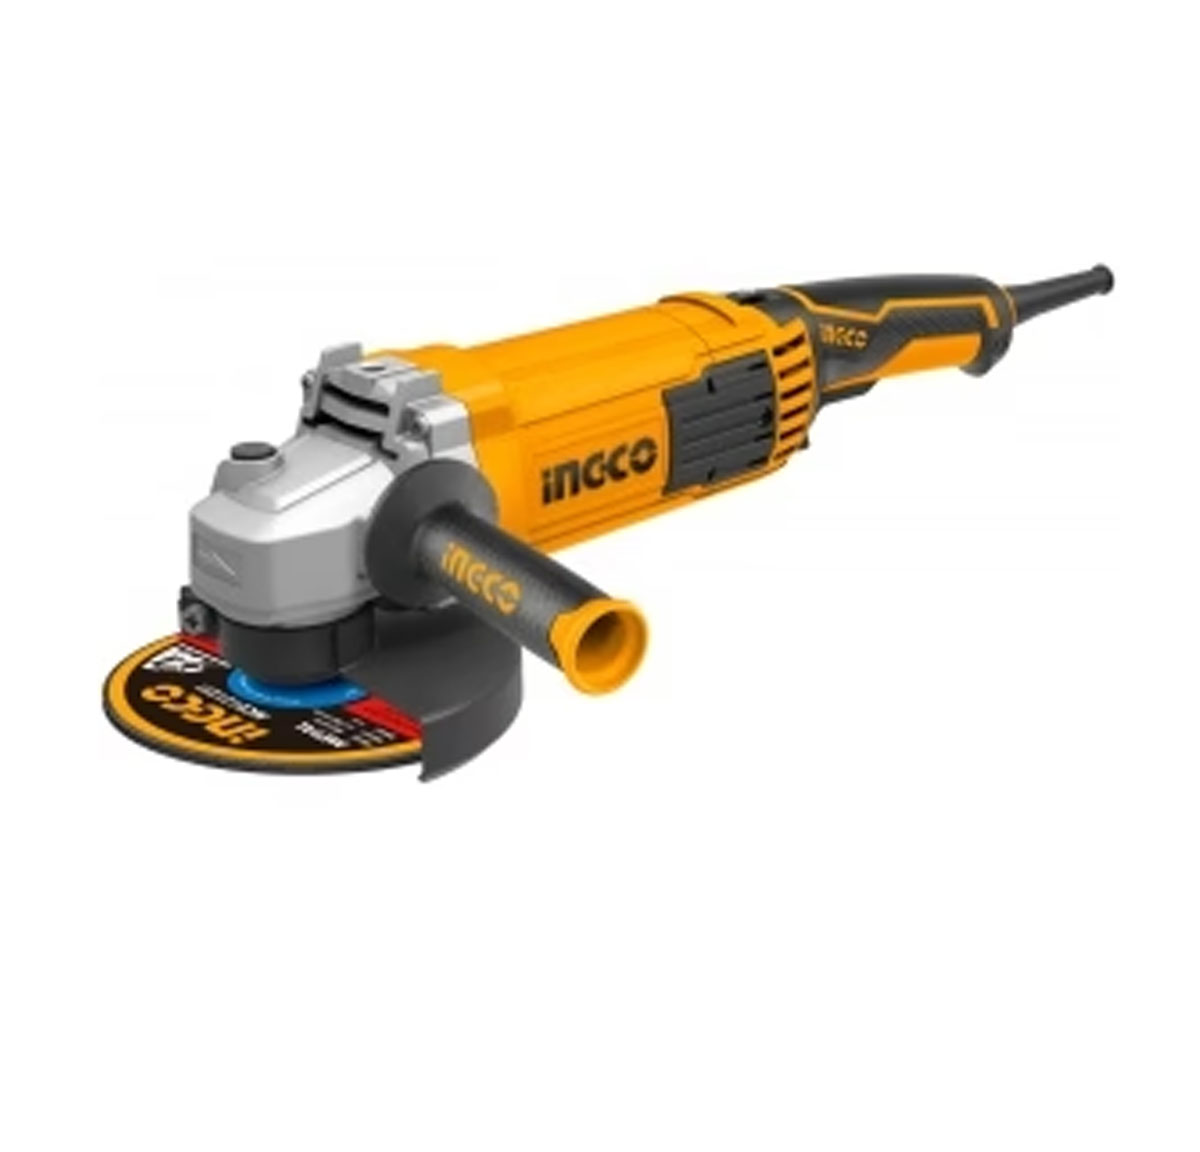 Ingco Angle grinder 2000W 180mm AG200018